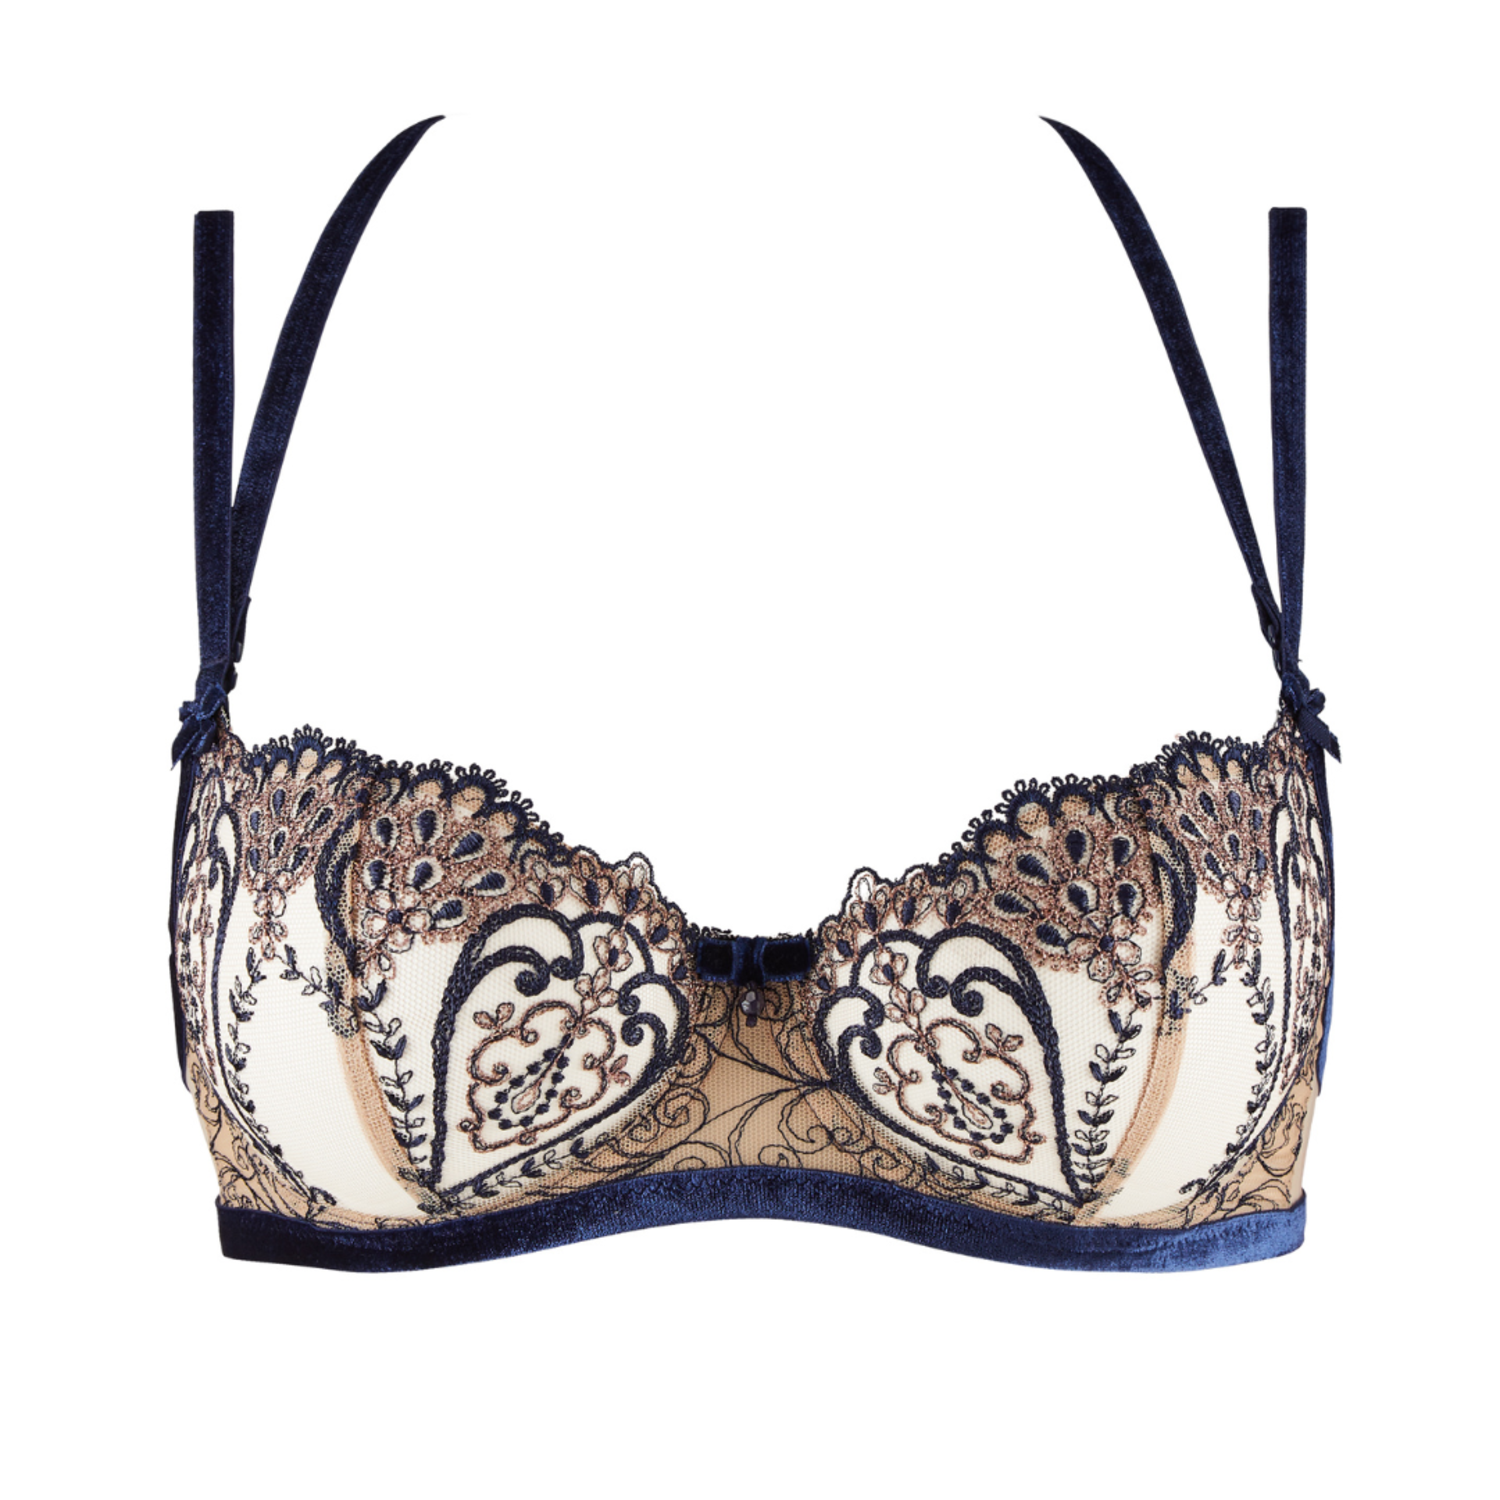 Famous brand water bras. lace embroidered bras to beautify and